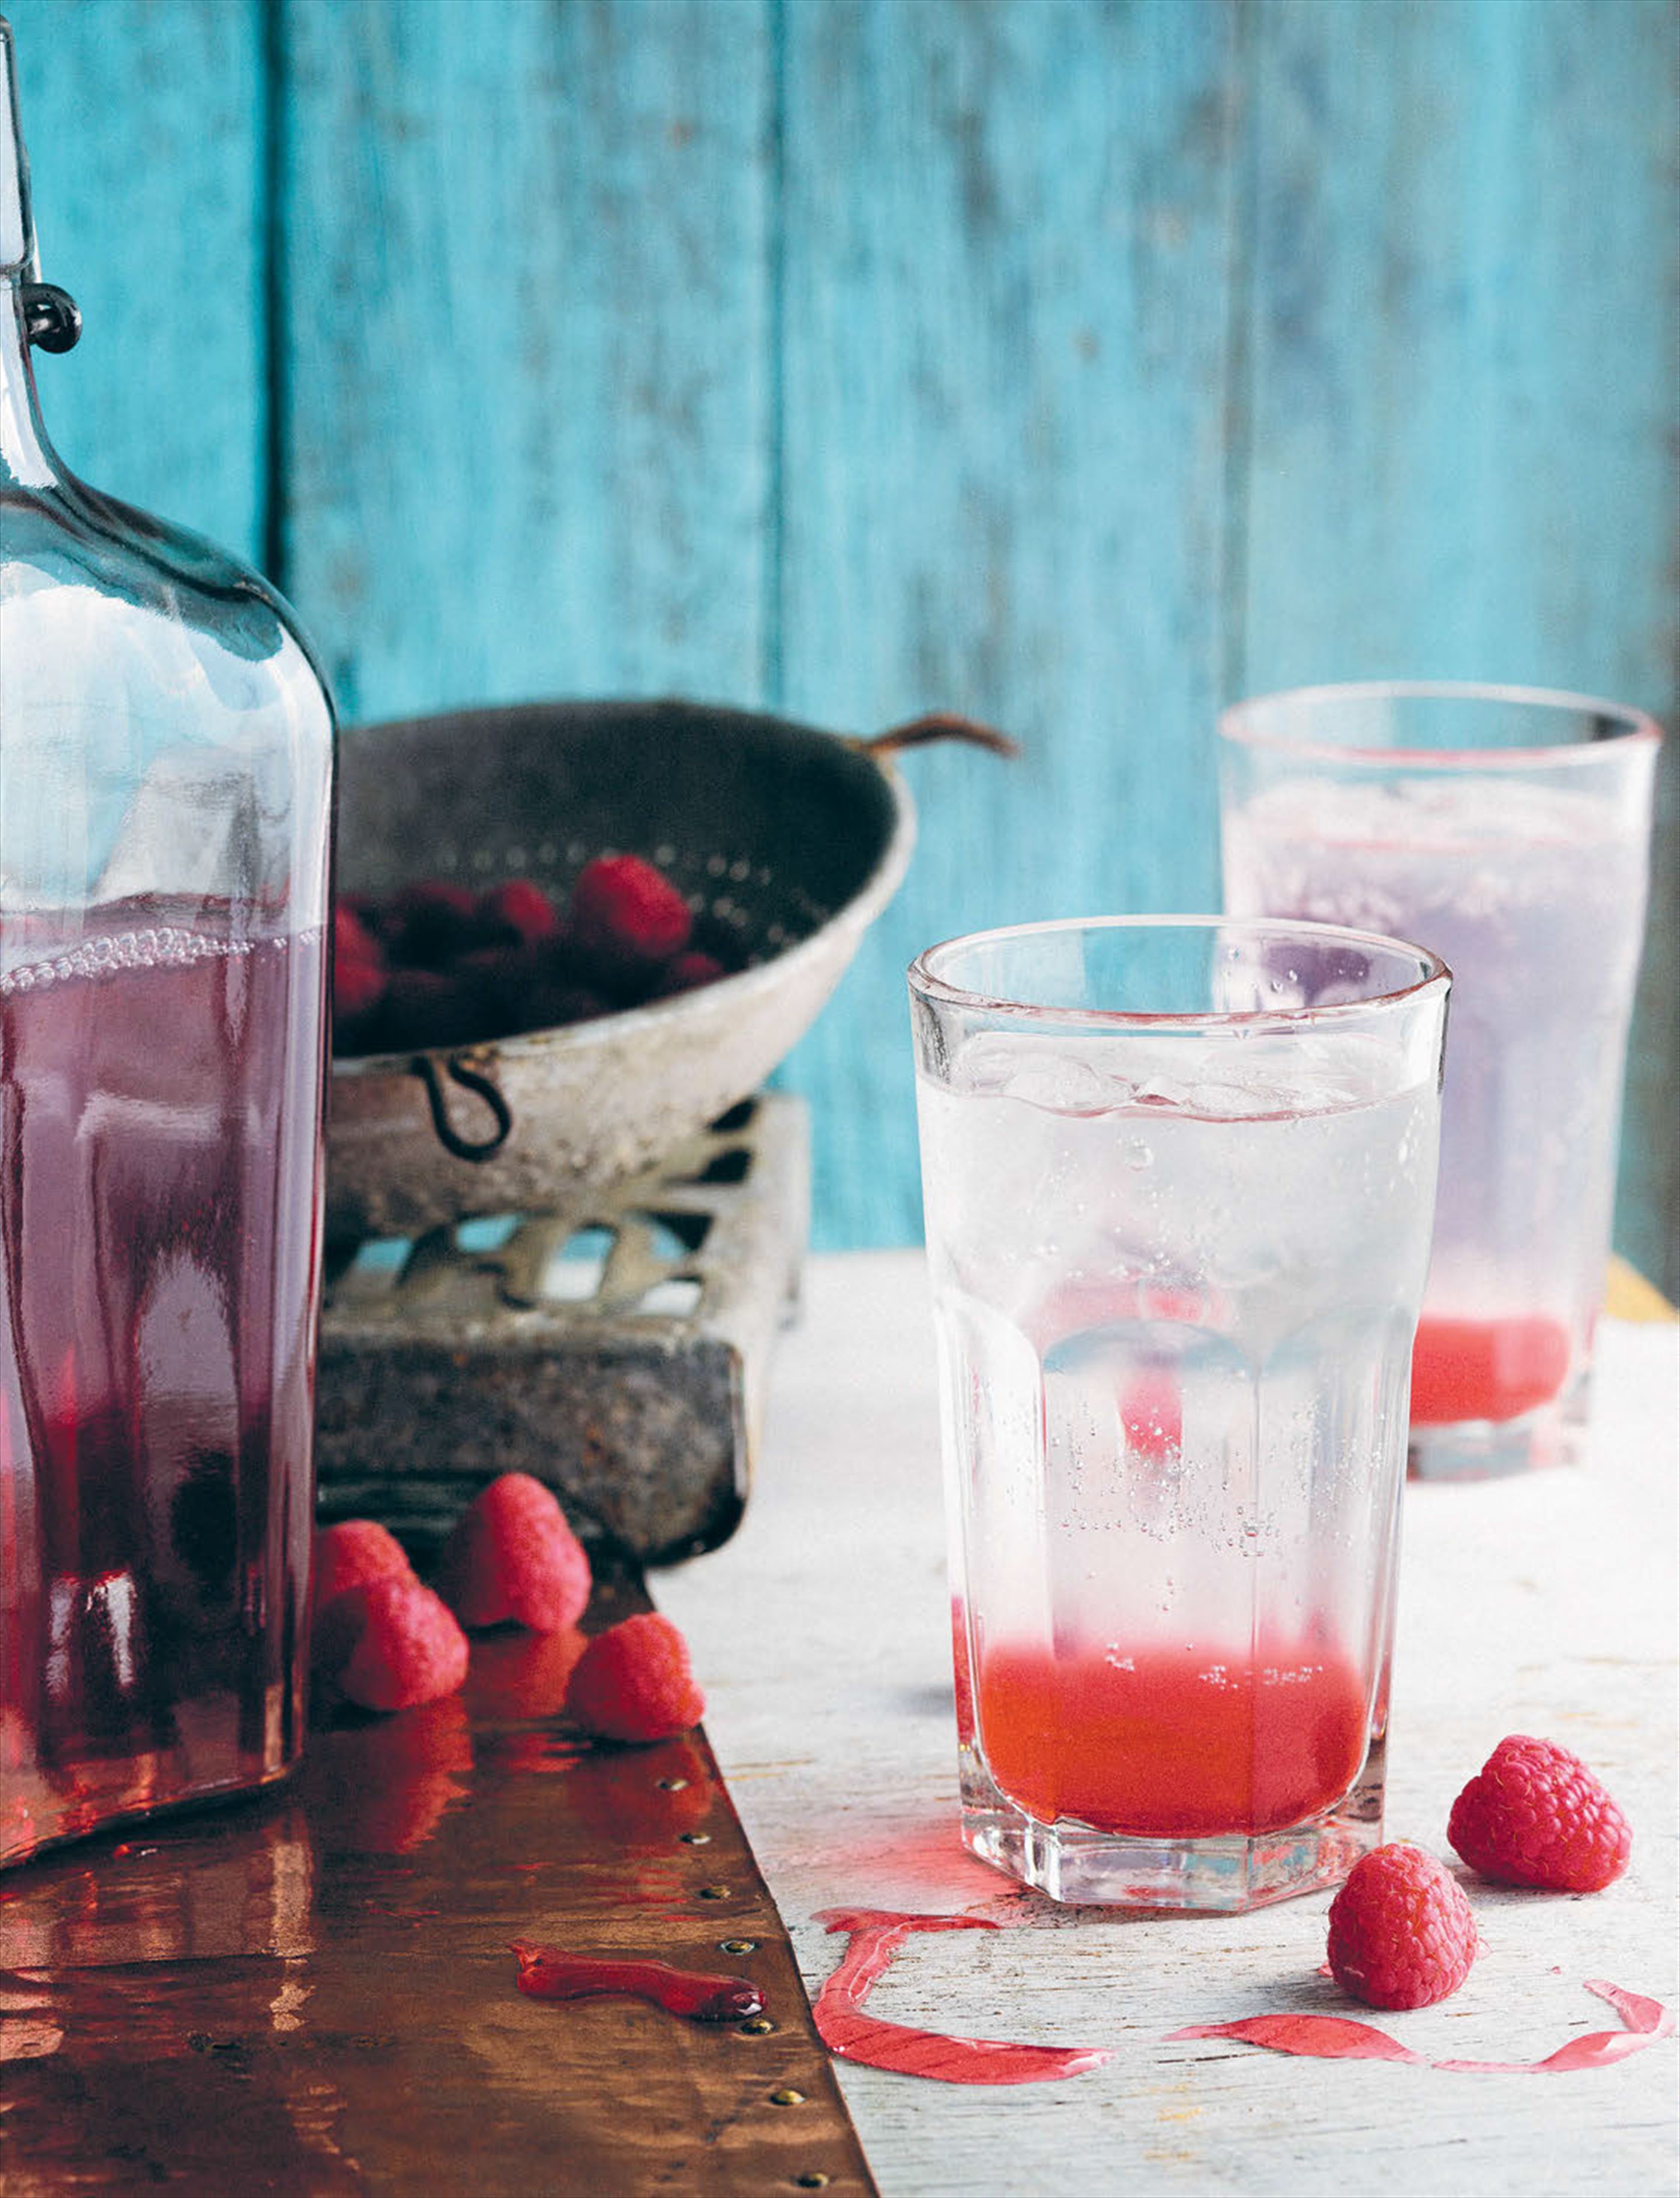 Raspberry and apple cordial